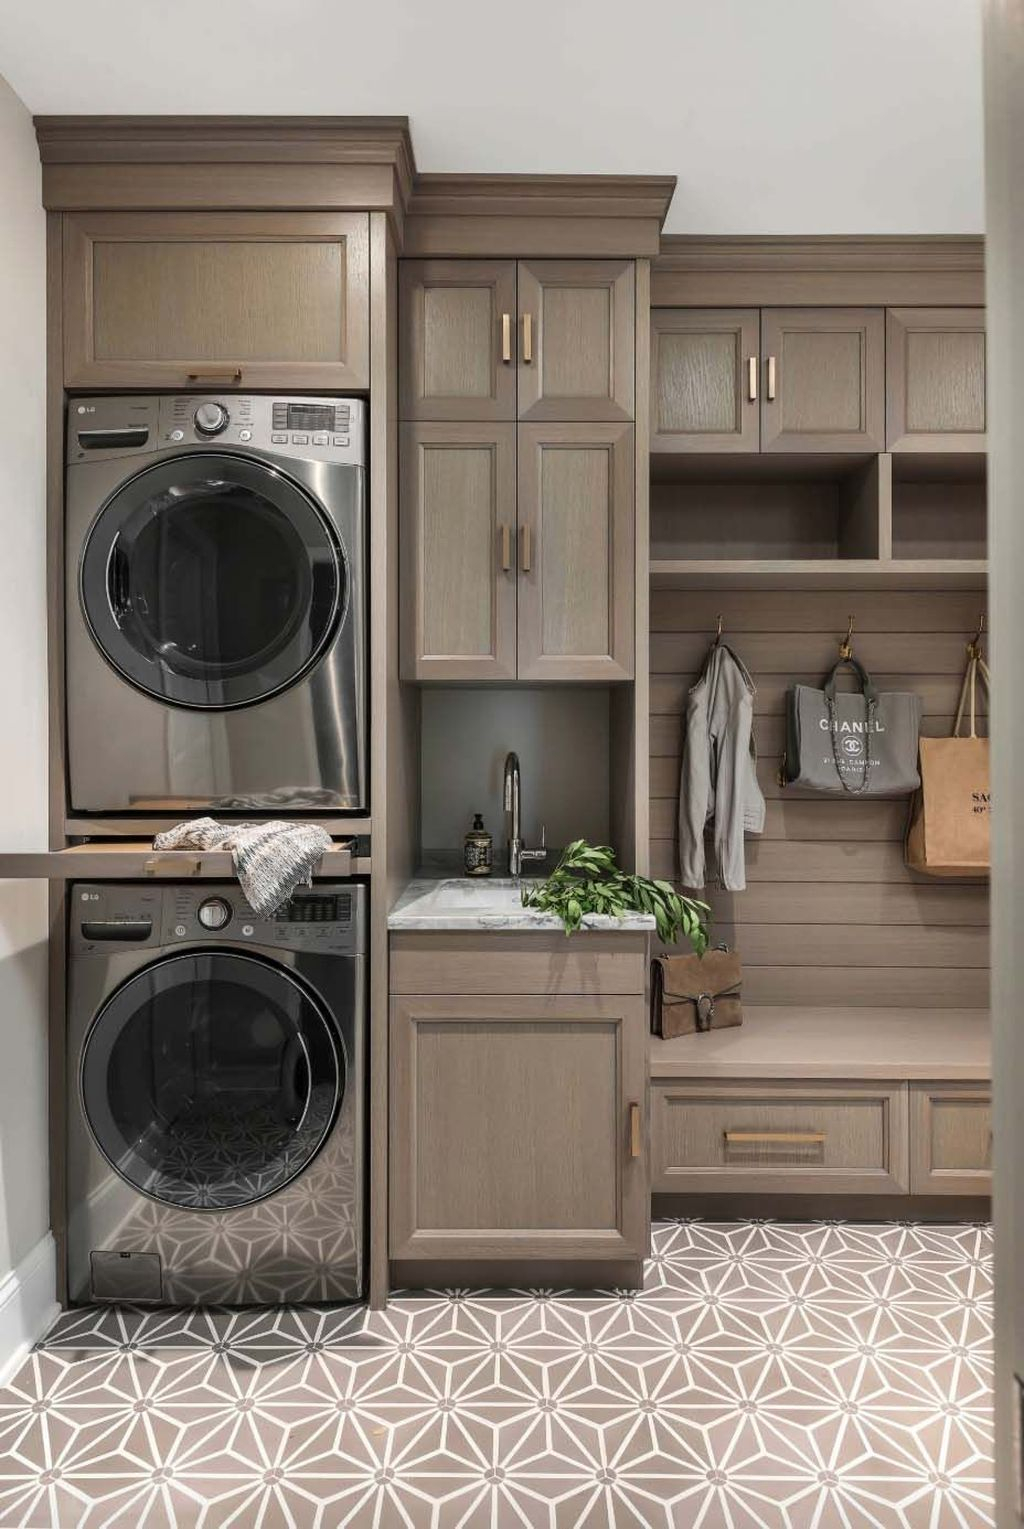 Favored Laundry Room Organization Ideas To Try 07